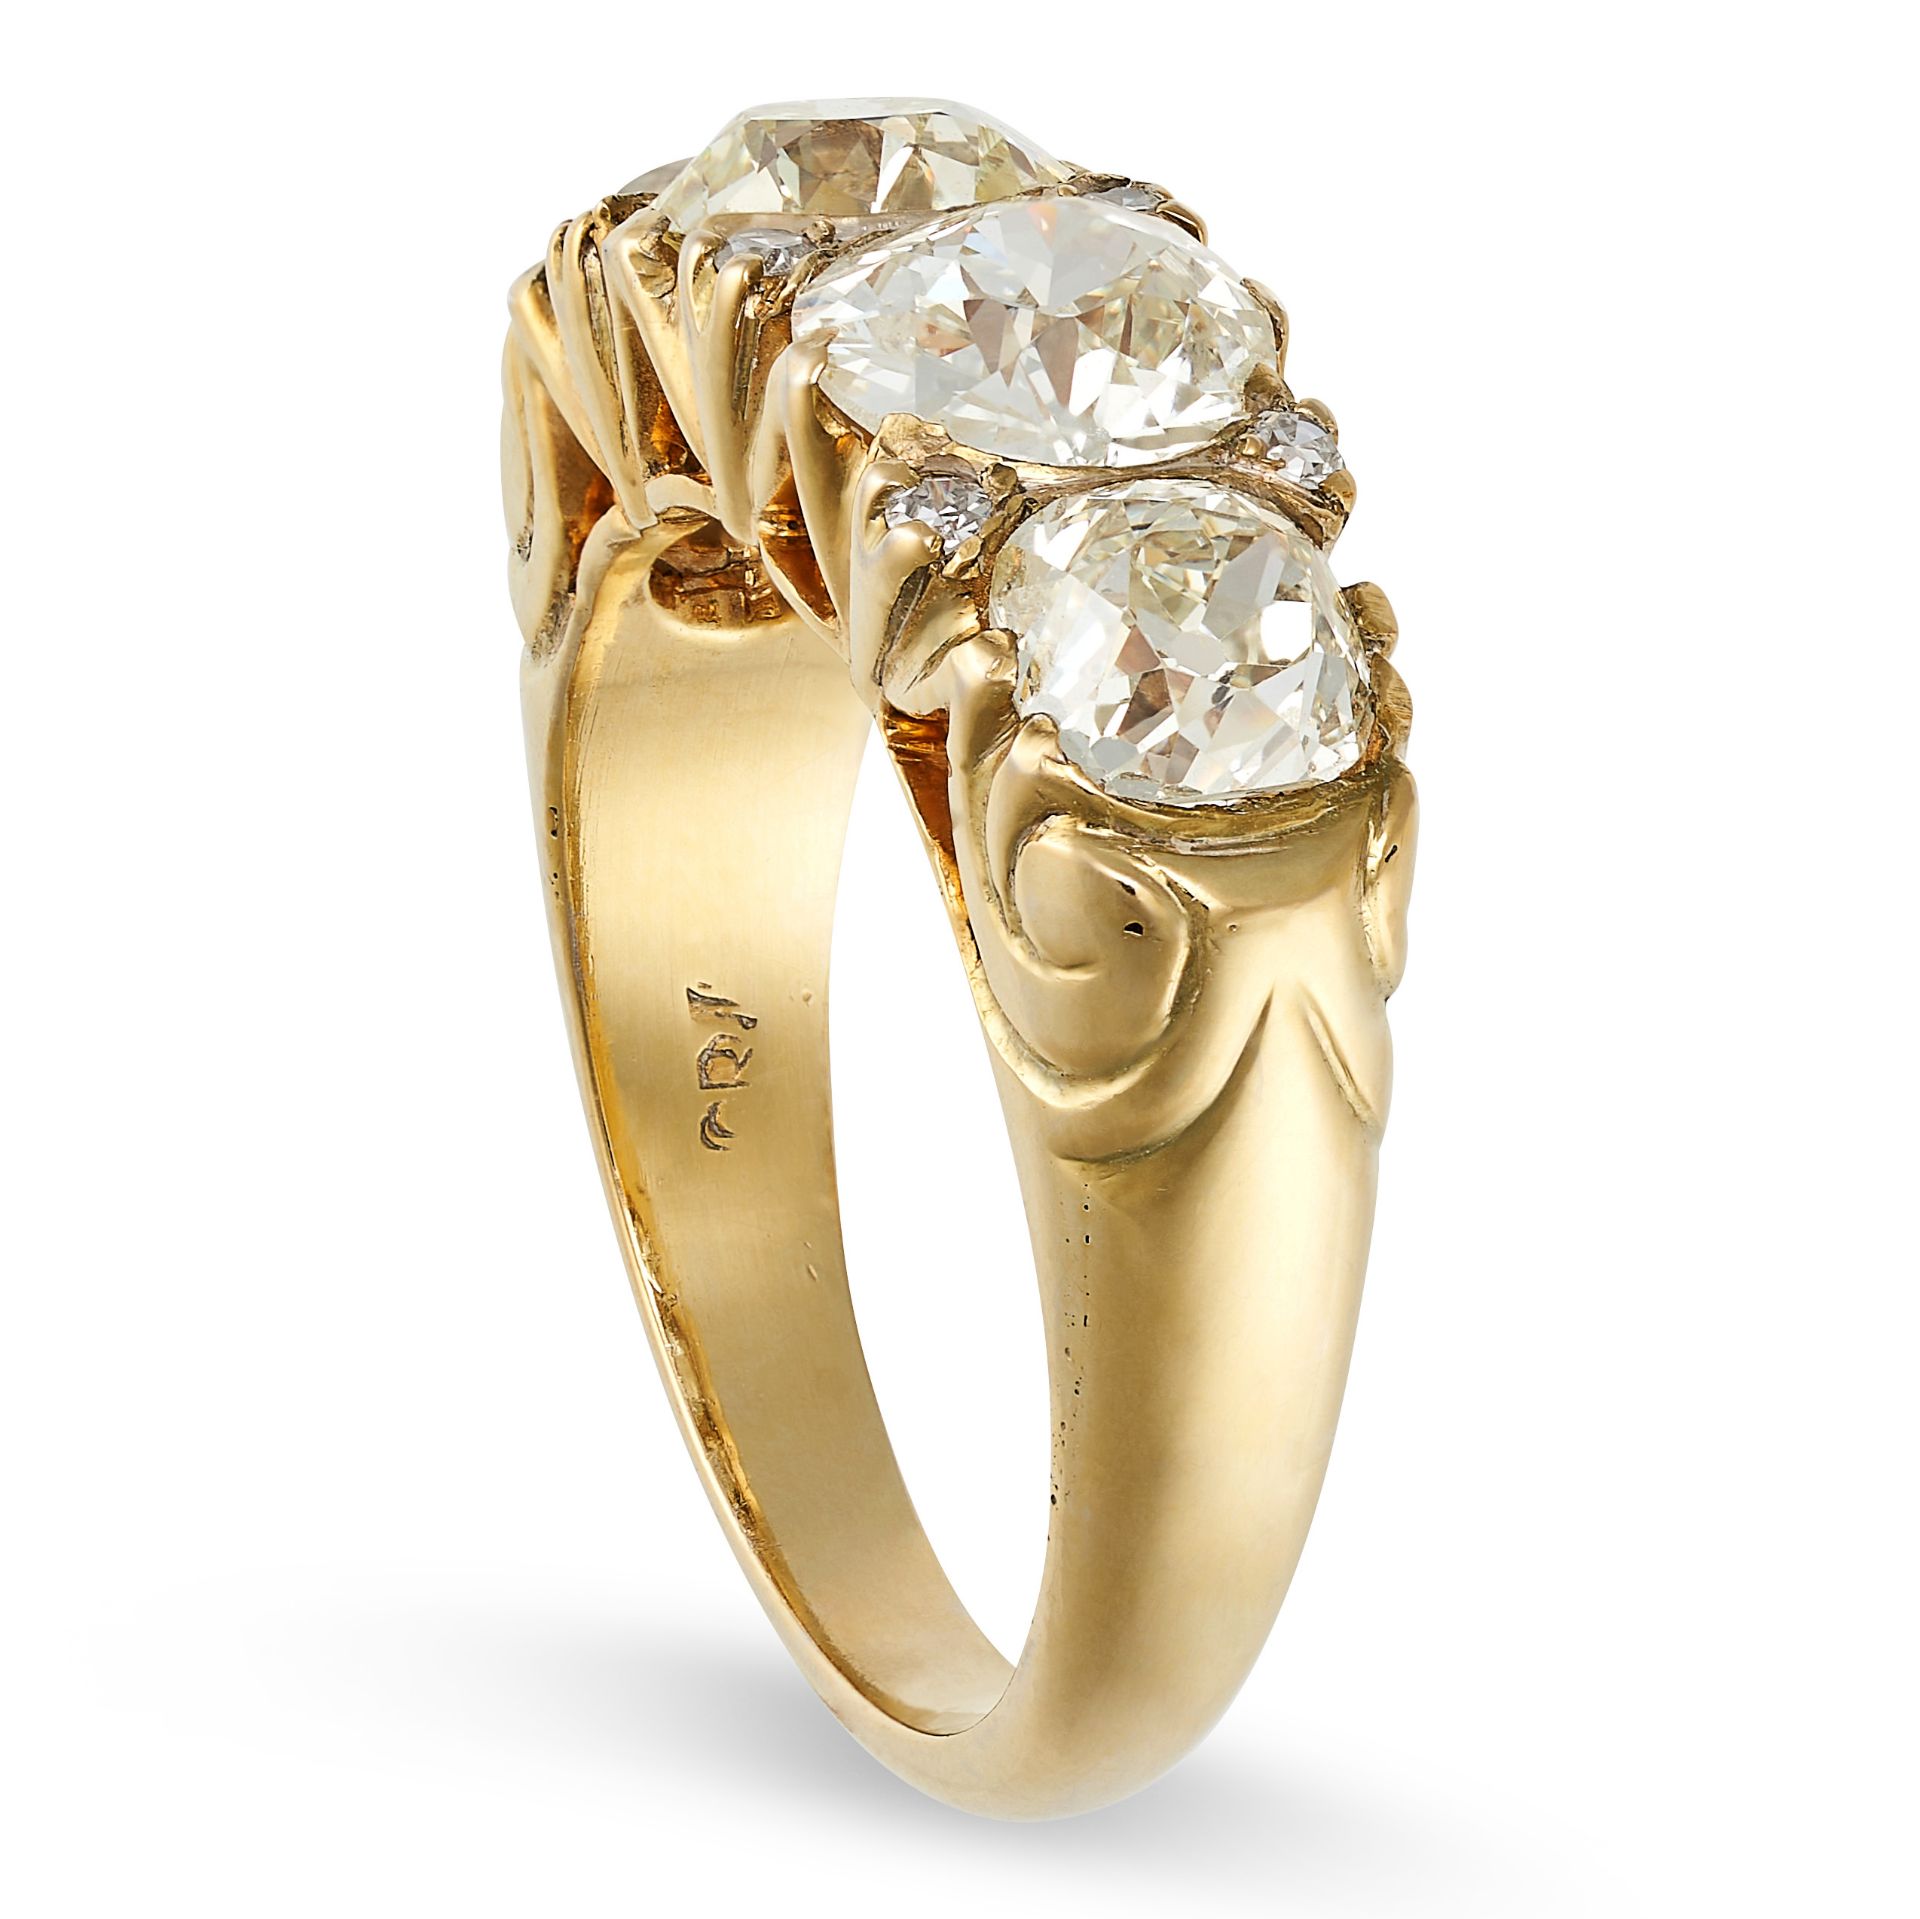 A DIAMOND HALF HOOP RING in yellow gold, set with four principal old cut diamonds of approximately - Image 2 of 2